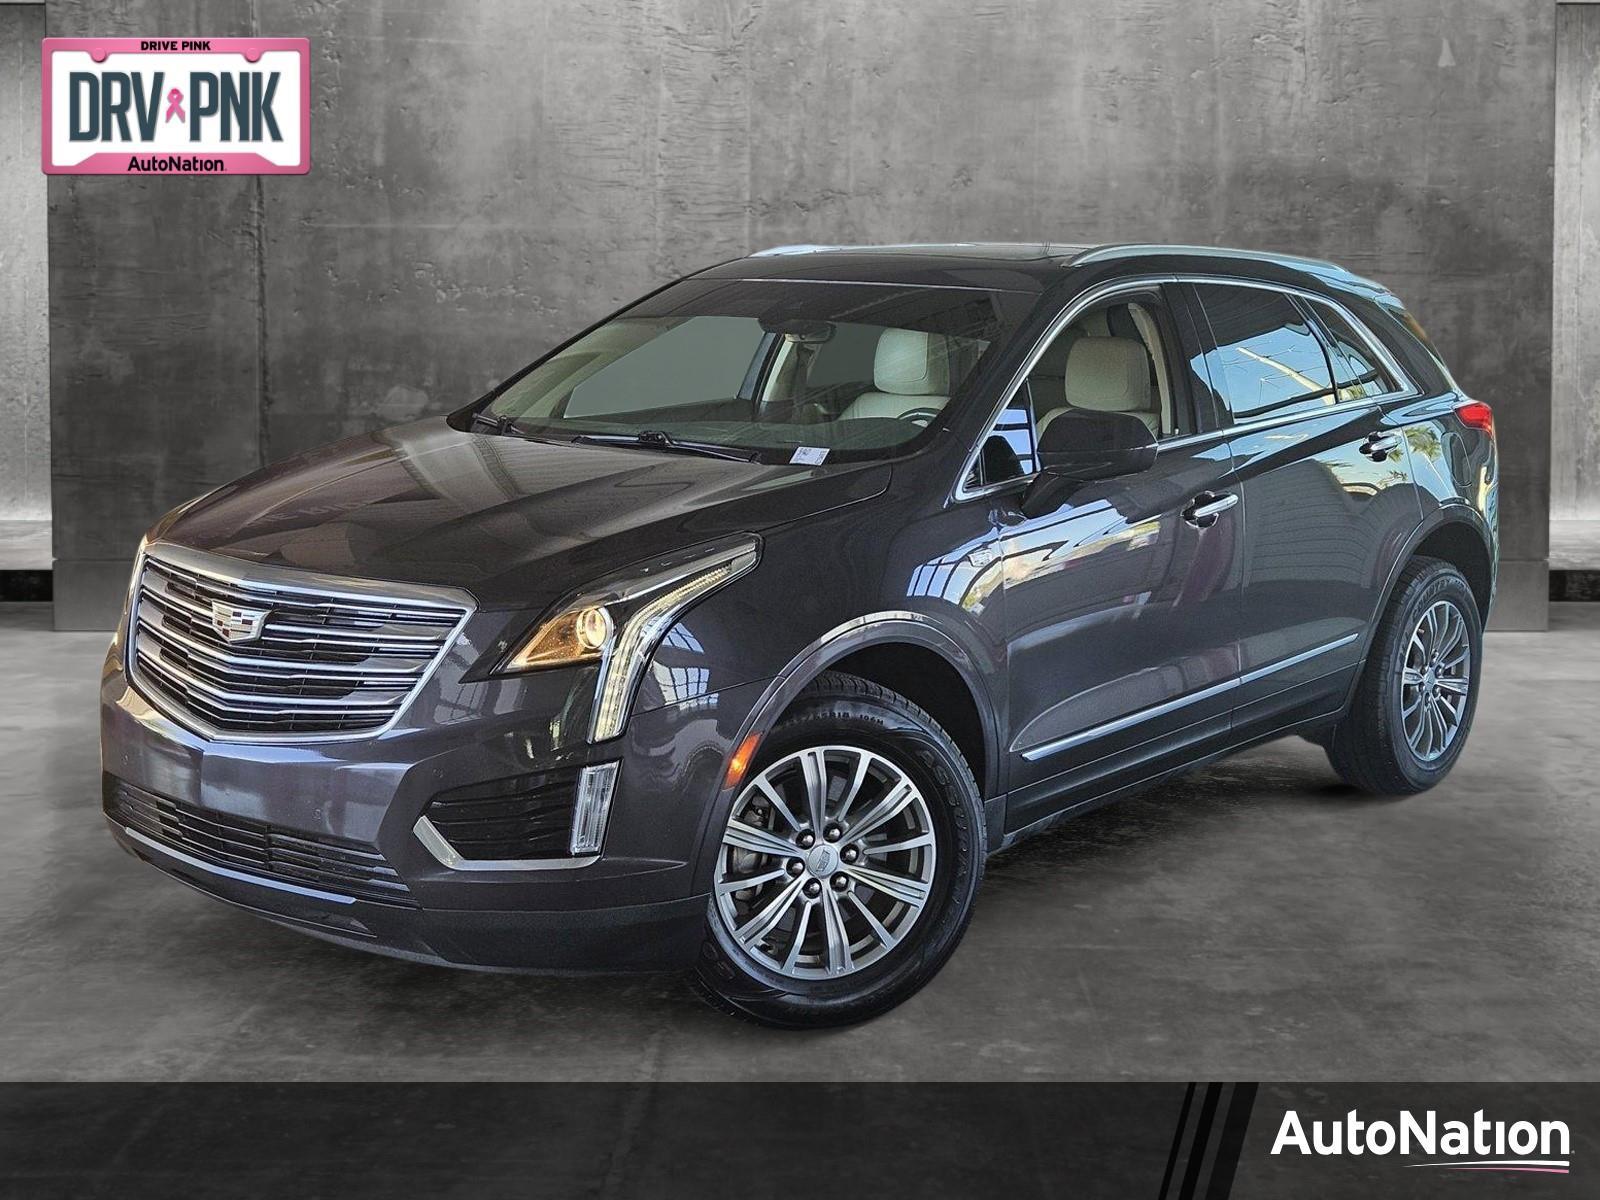 2019 Cadillac Xt5 For In Las Vegas